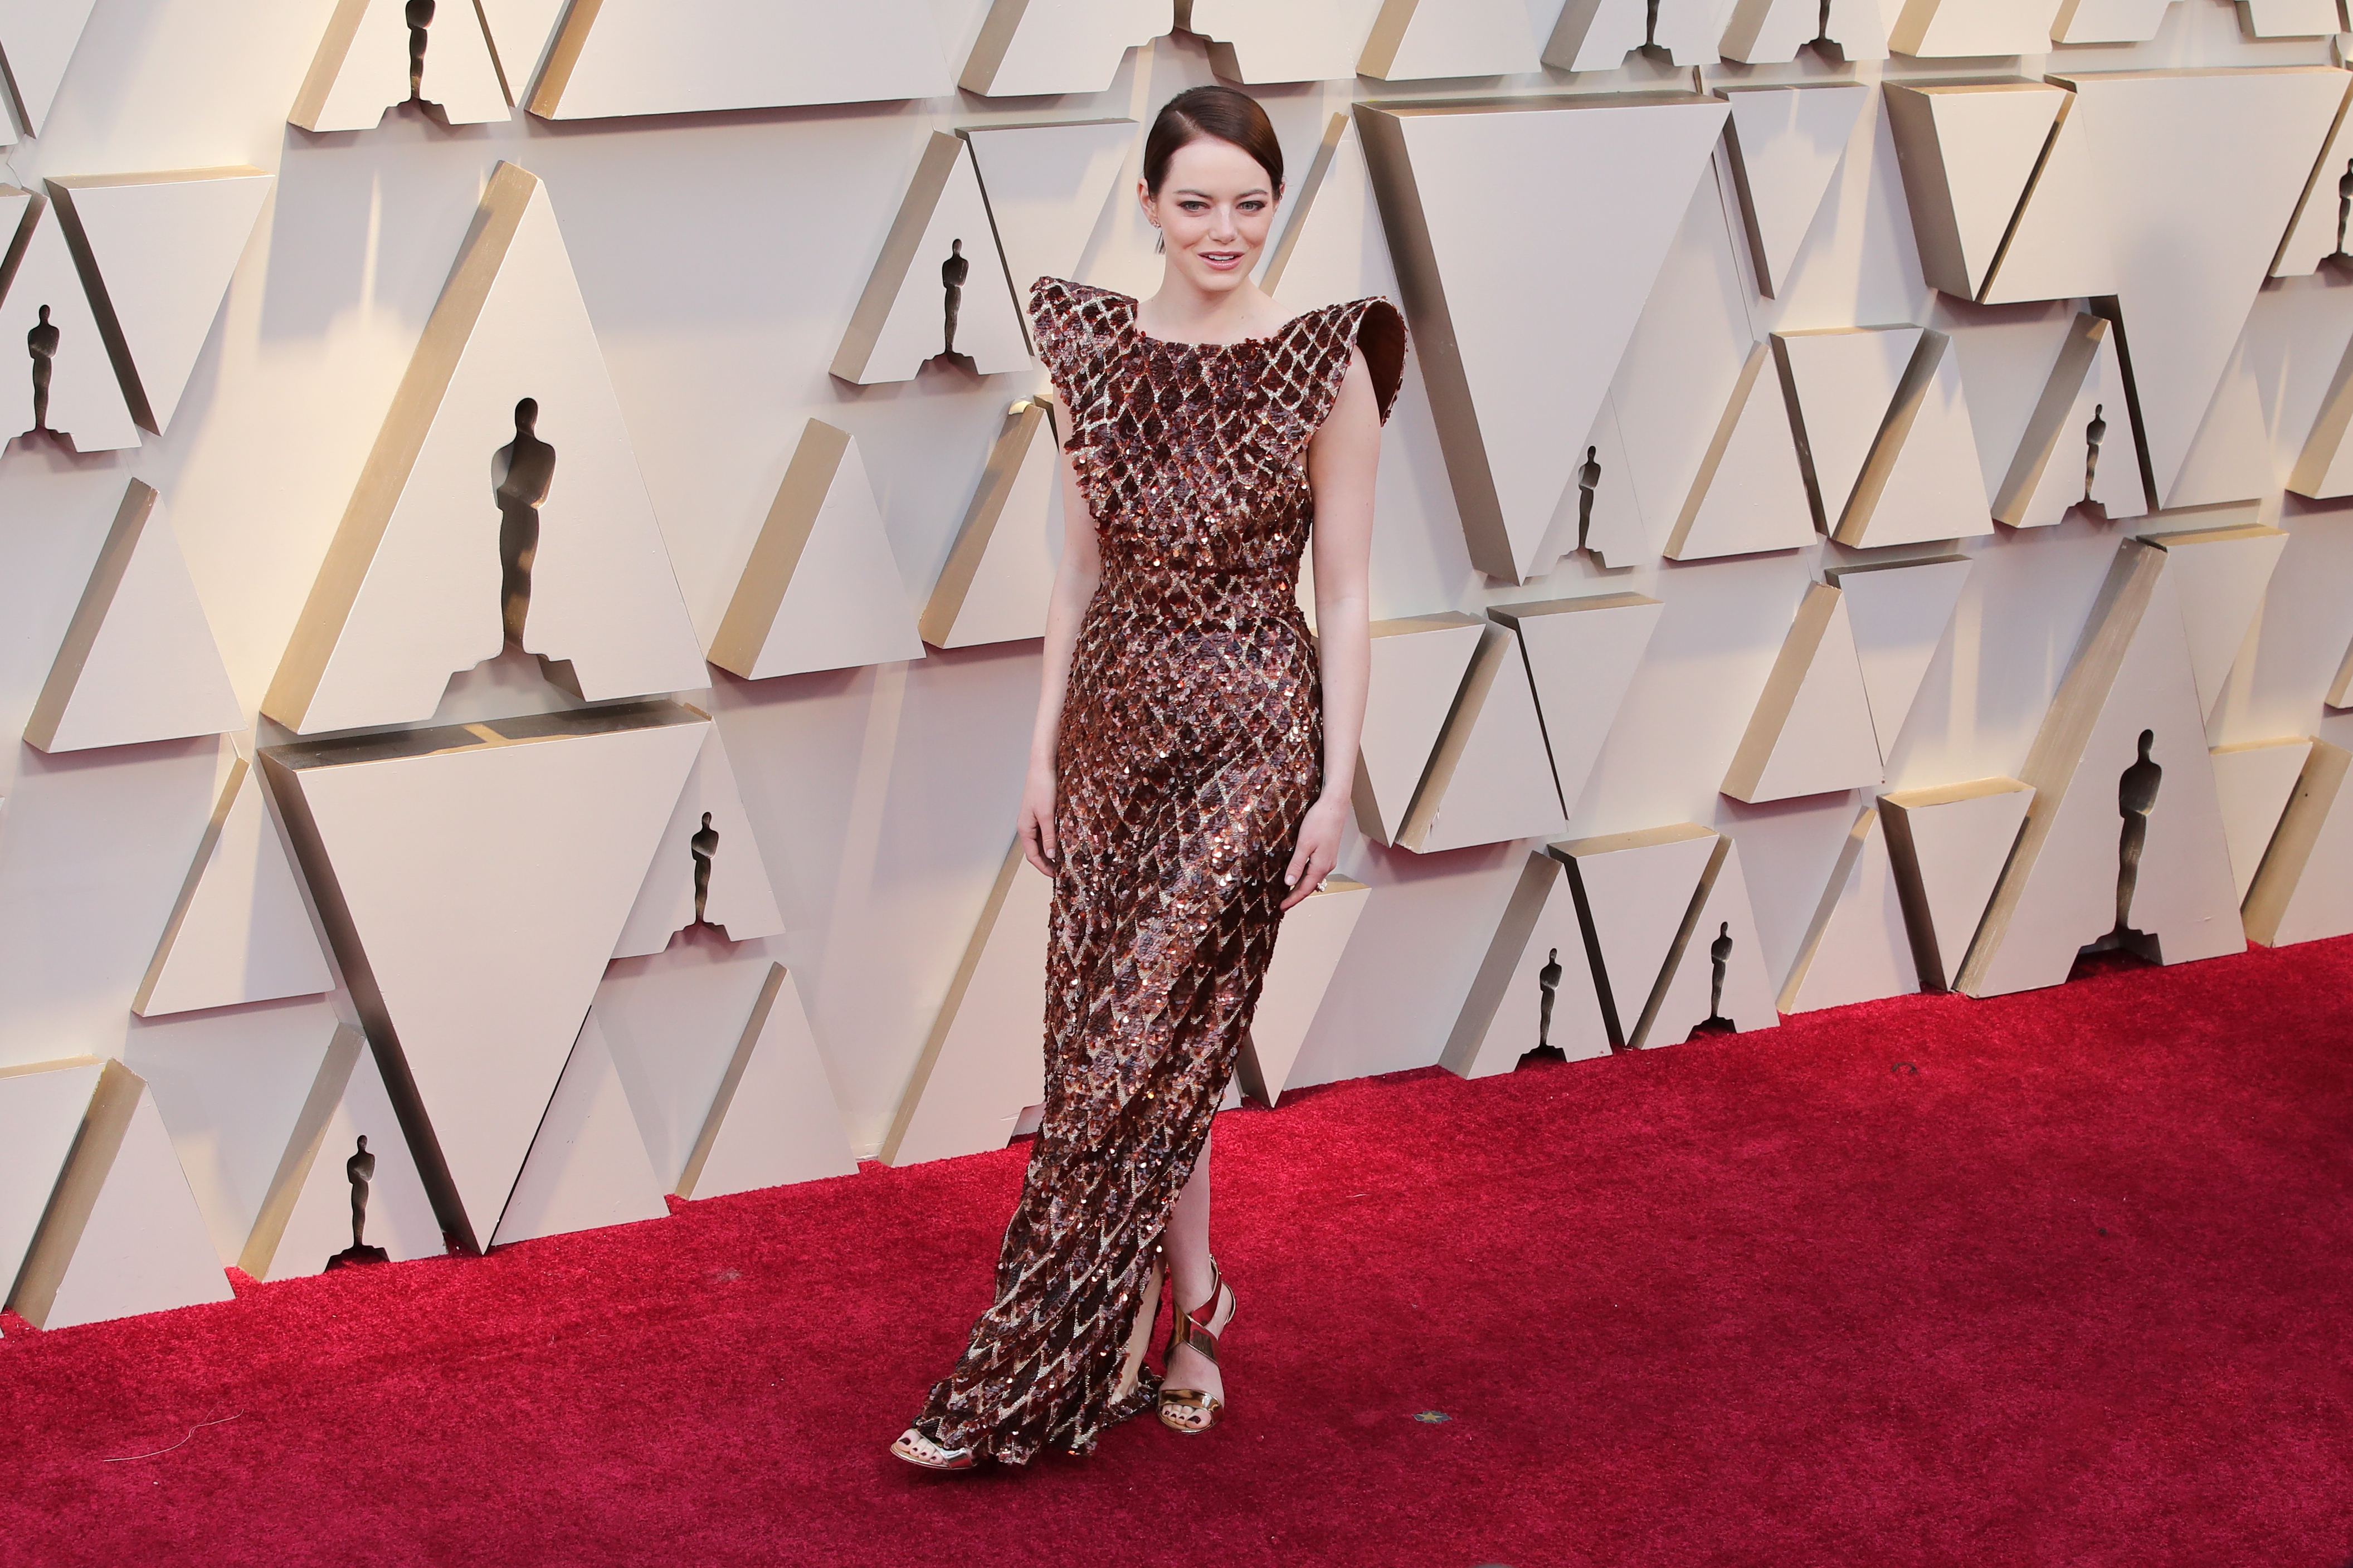 Emma Stone in Louis Vuitton
(Photo by Neilson Barnard/Getty Images)